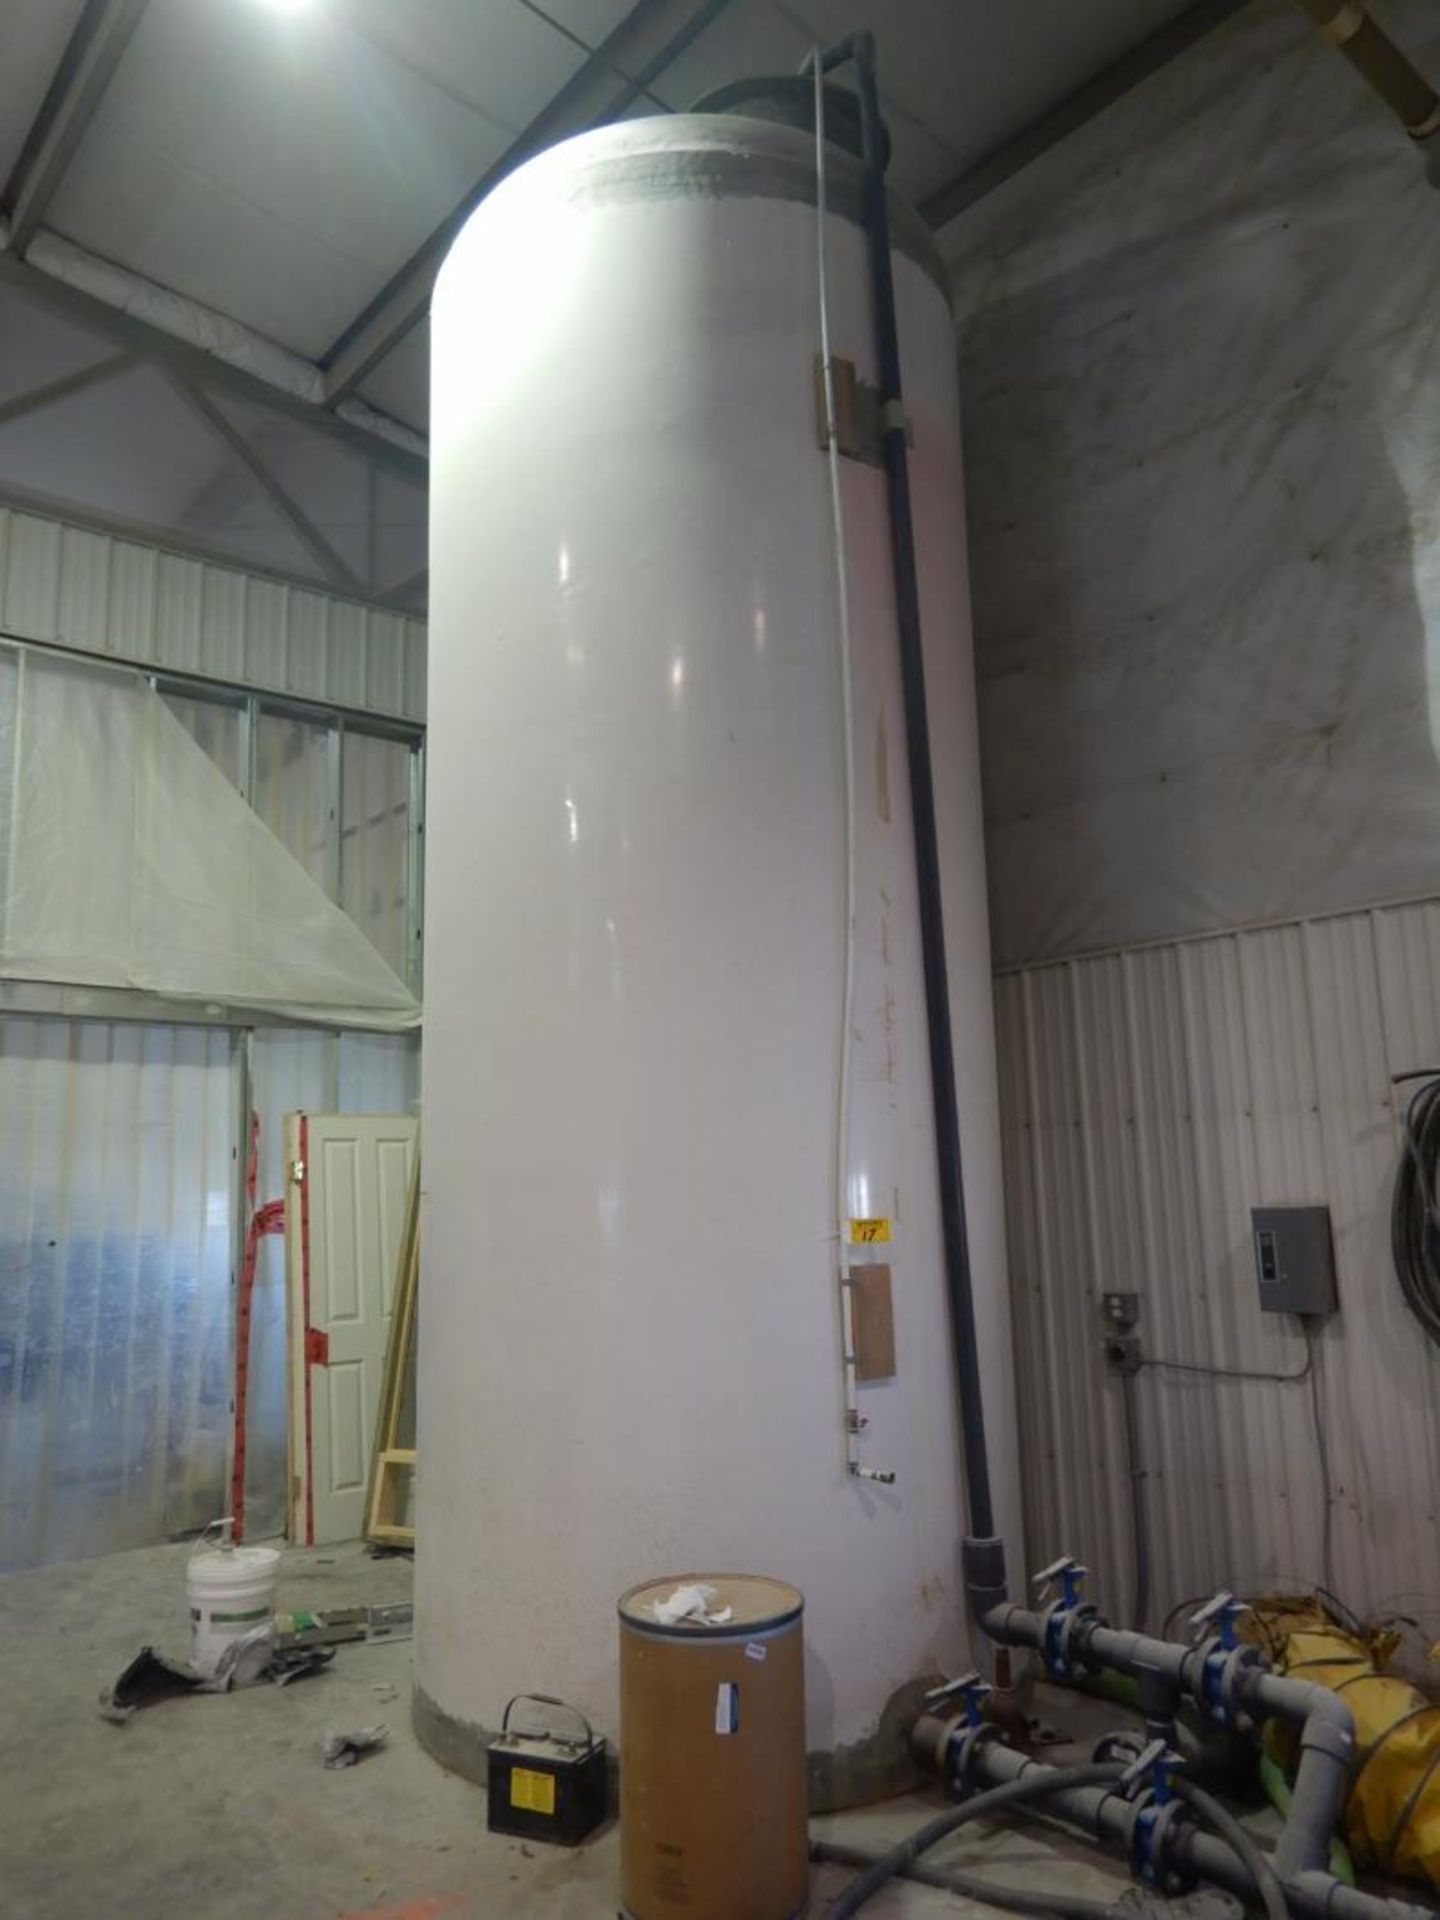 16FT X 68" CYLINDRICAL FIBERGLASS WATER TANK - 3000 GAL LOCATED IN SYLVAN LAKE, AB, CANADA & REMOVAL - Image 2 of 4